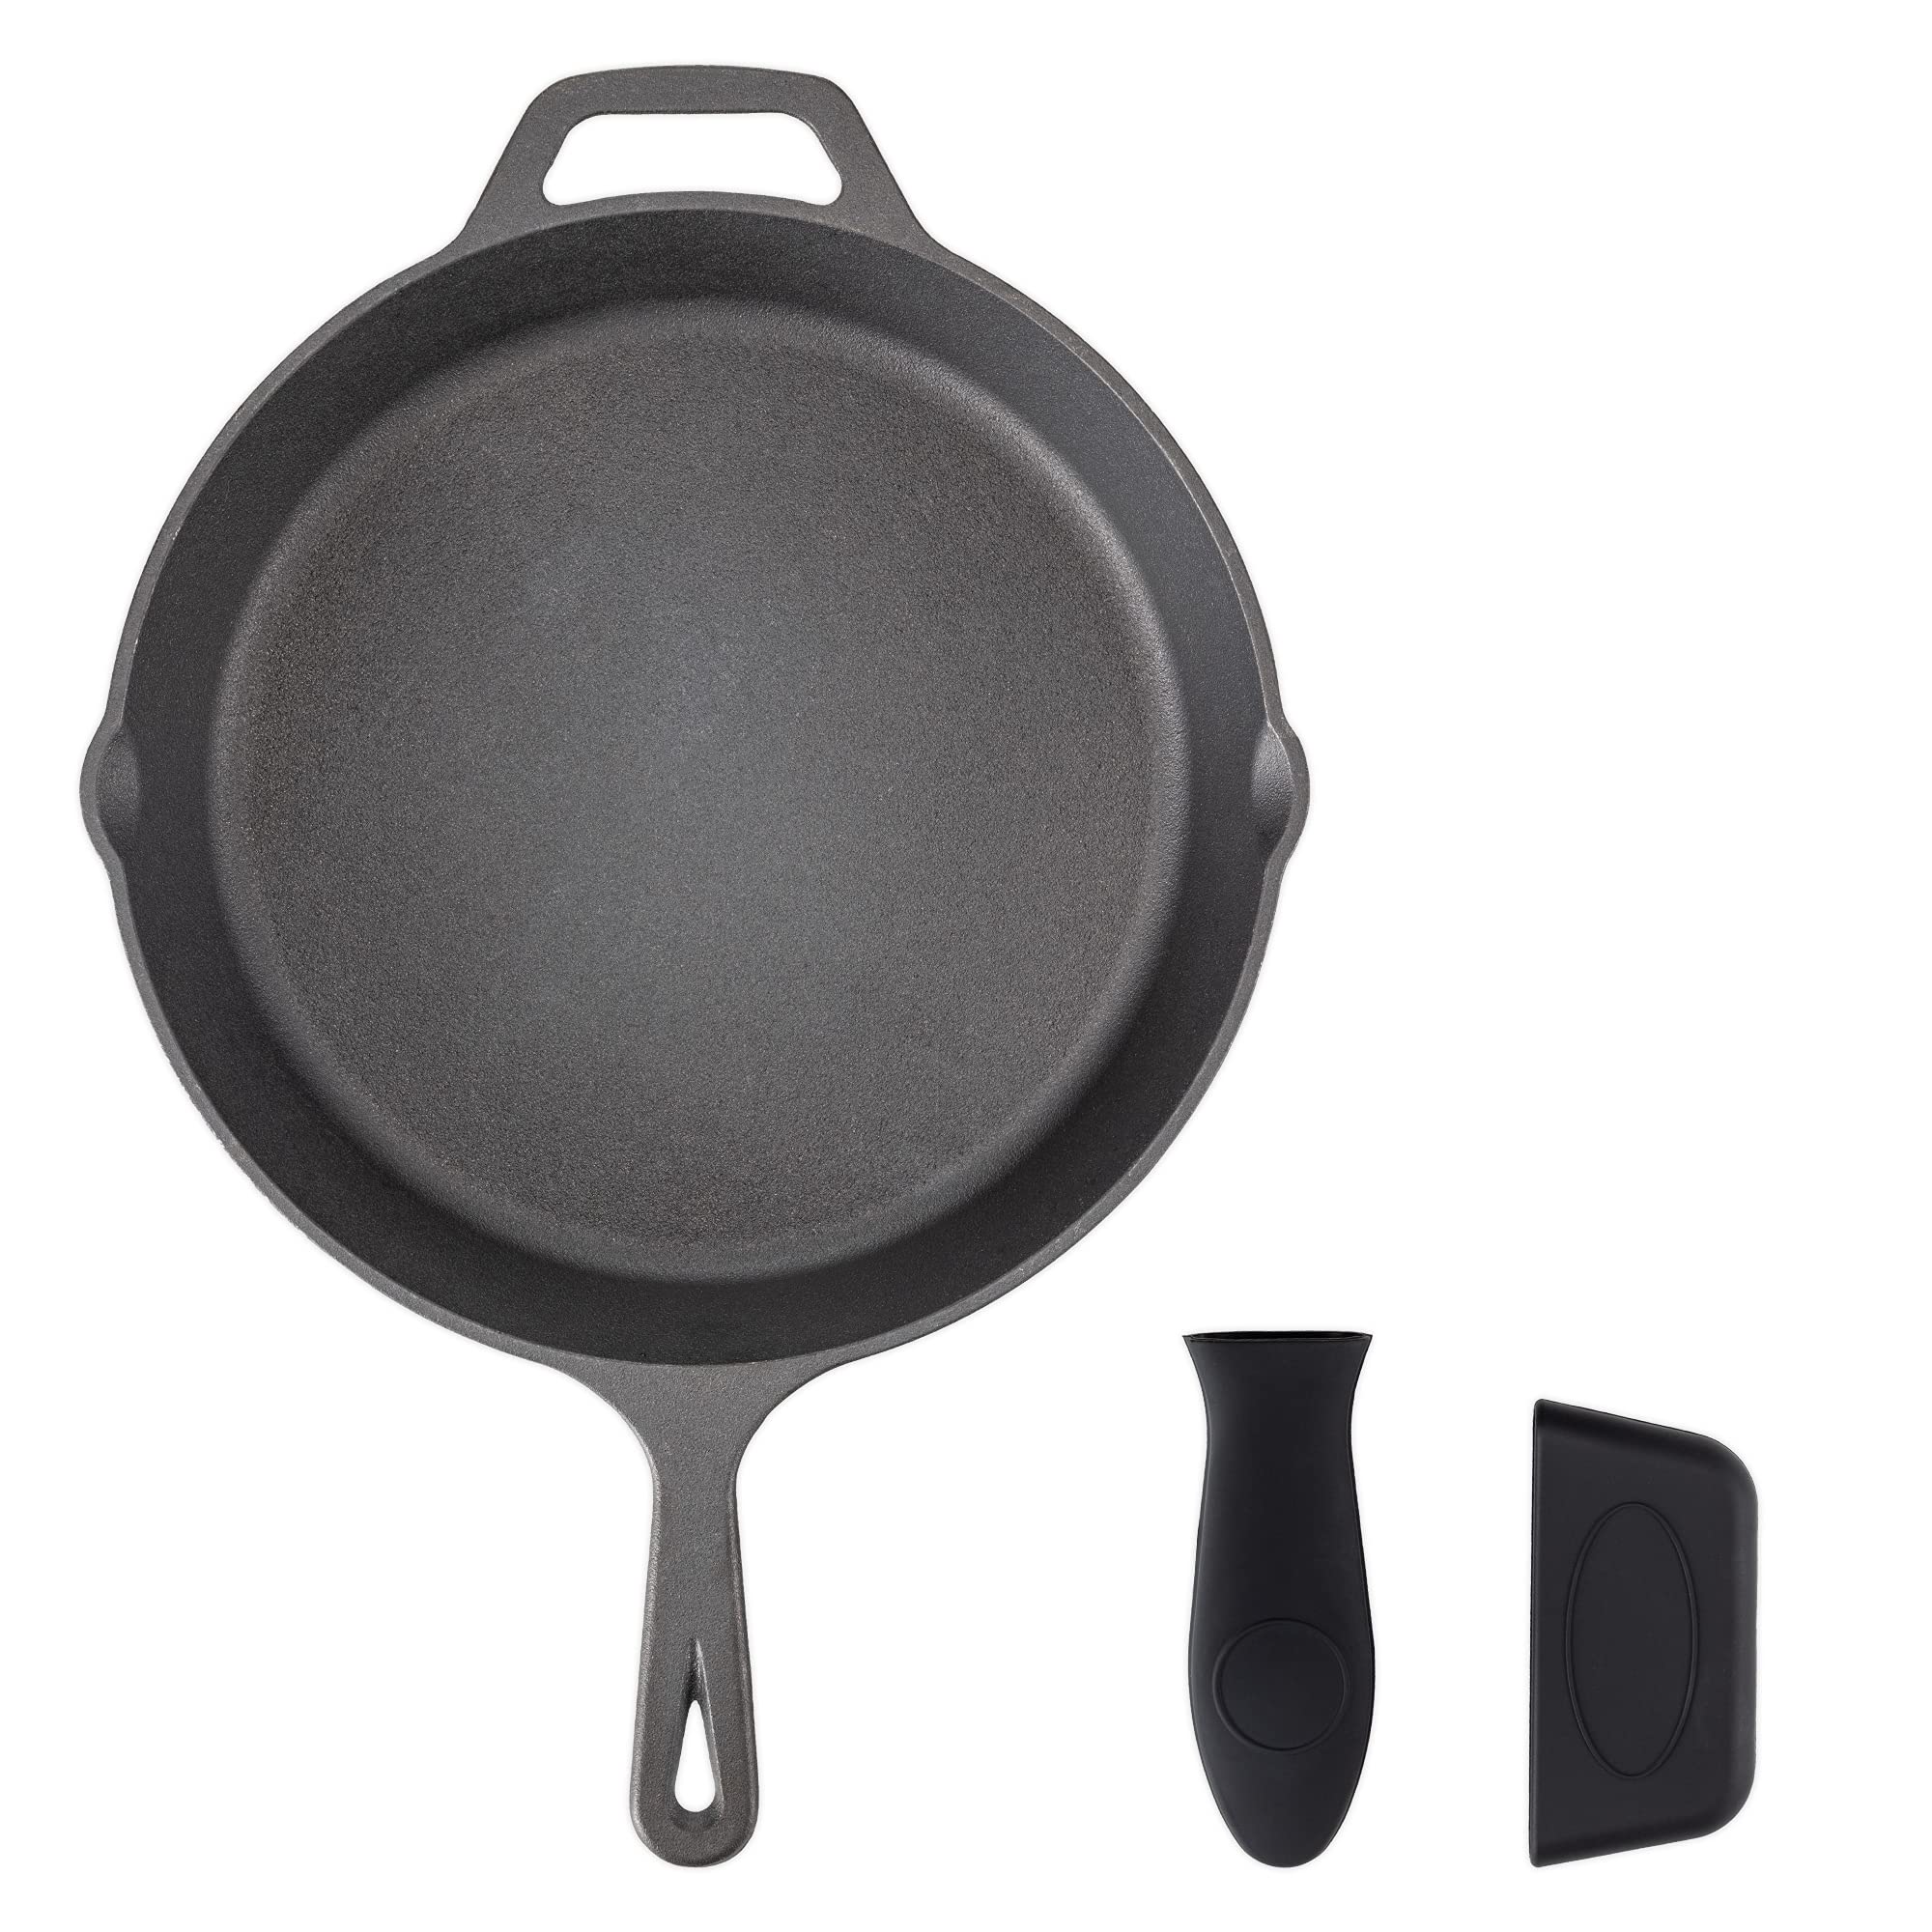 Navaris Cast Iron Skillet - 12 inch Cast Iron Pan - Seasoned Cookware for Frying, Cooking, Oven, Stove Top, Camping - Includes Silicone Handle Covers